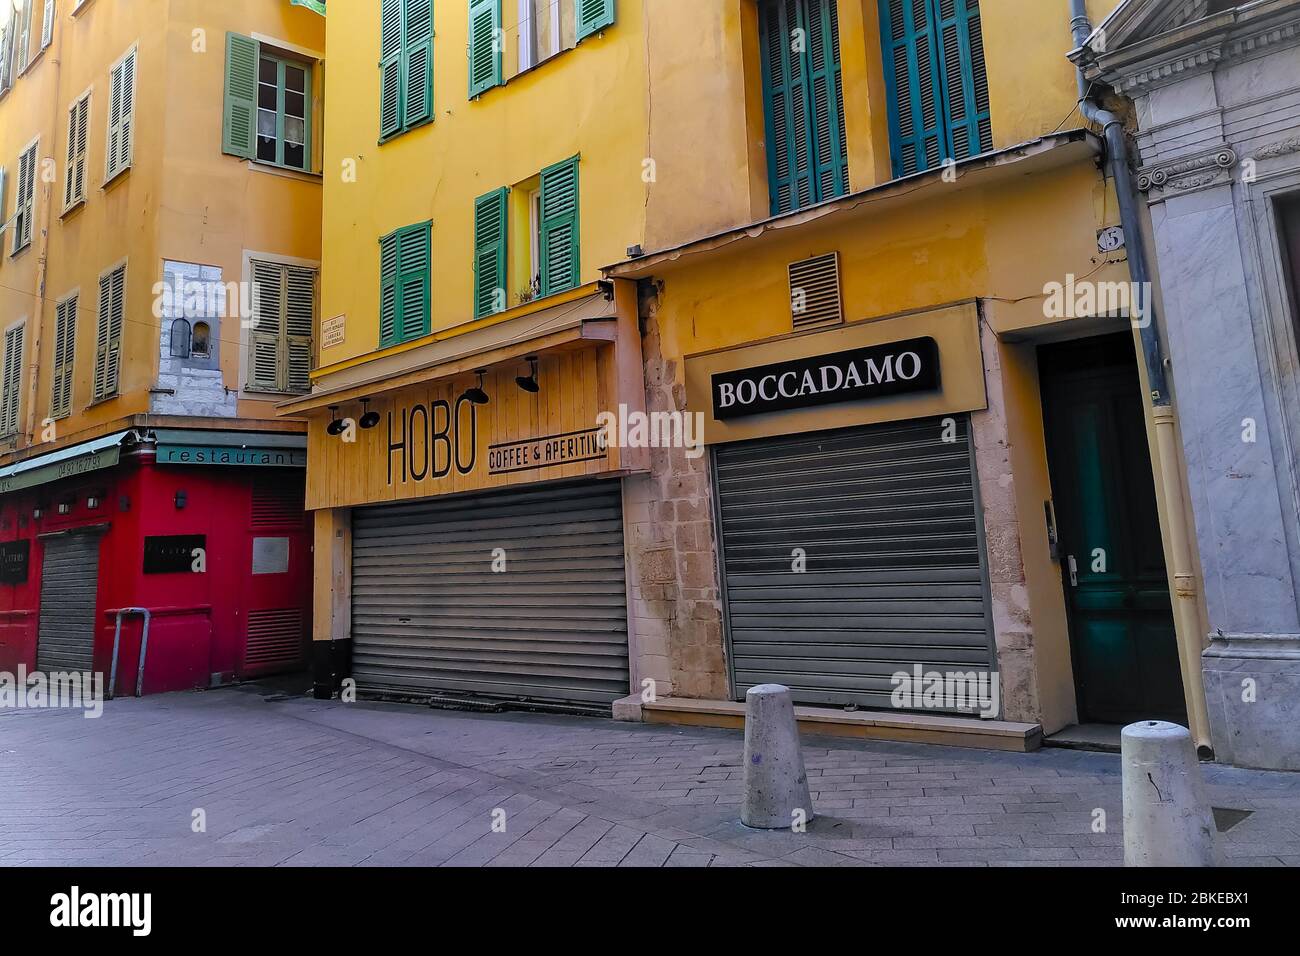 Closed shops and restaurants in colorful old buildings in the historical center of Nice, French Riviera, southern France. Stock Photo